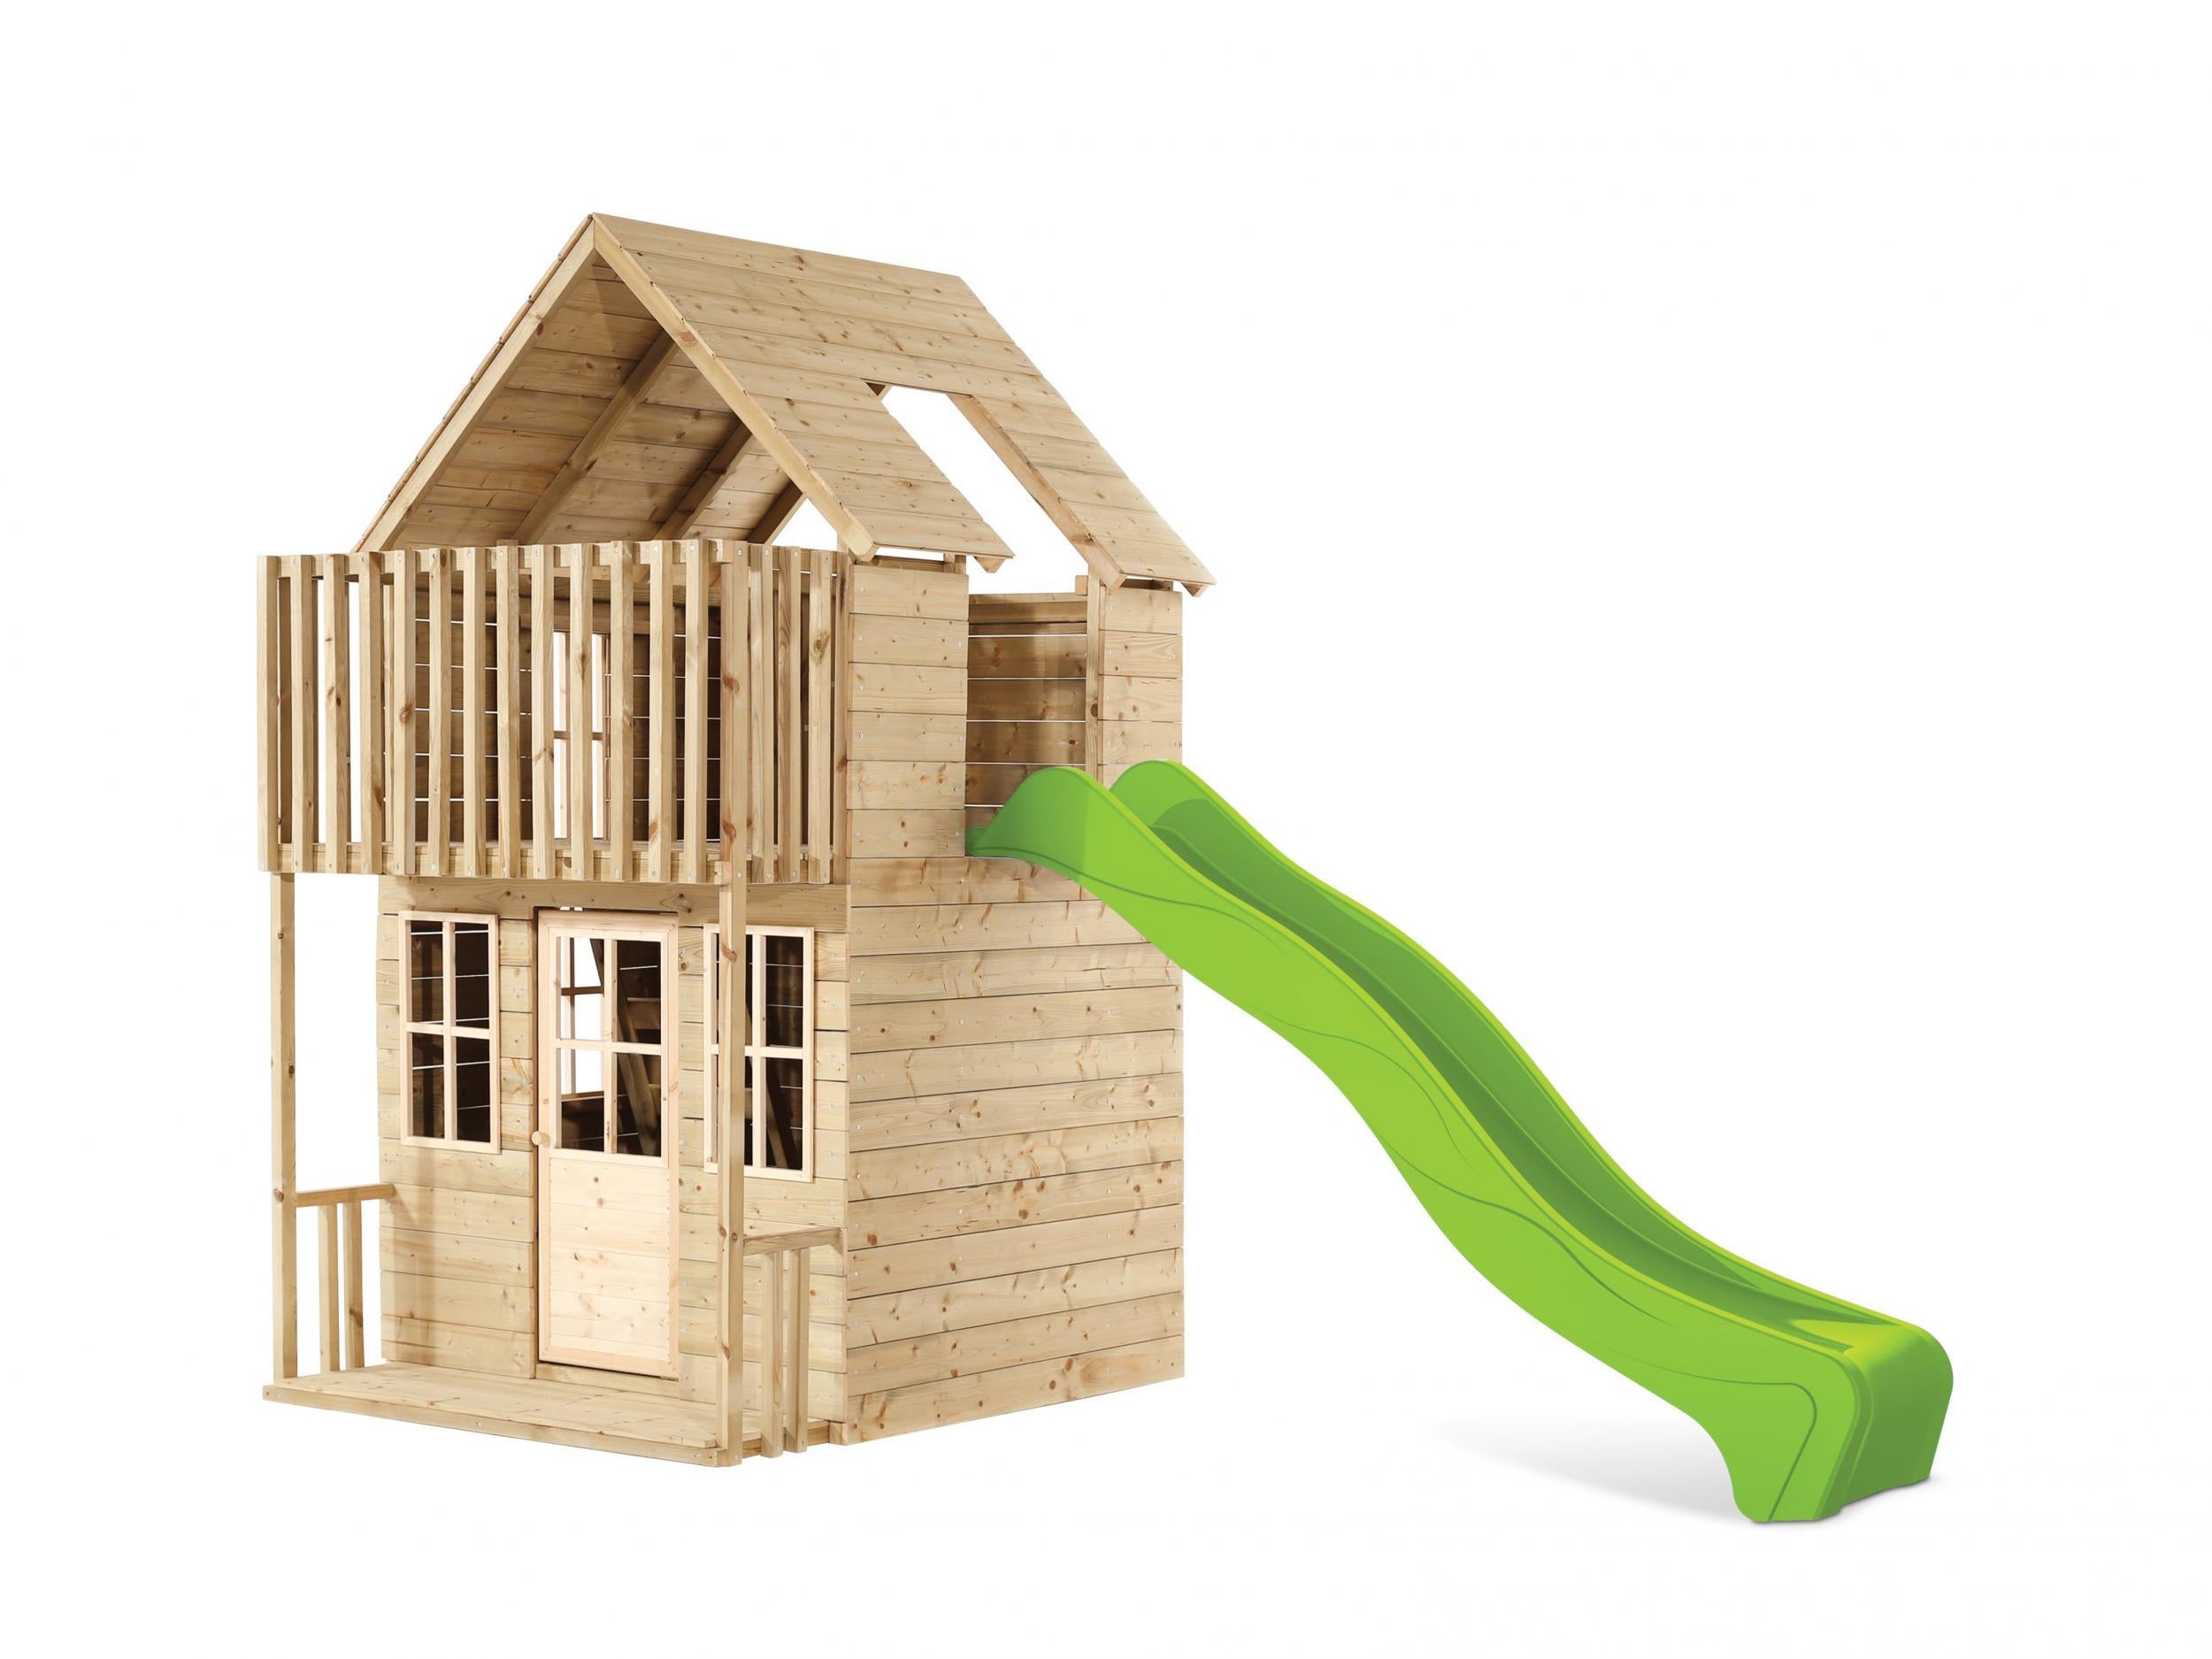 tp toys wooden playhouse